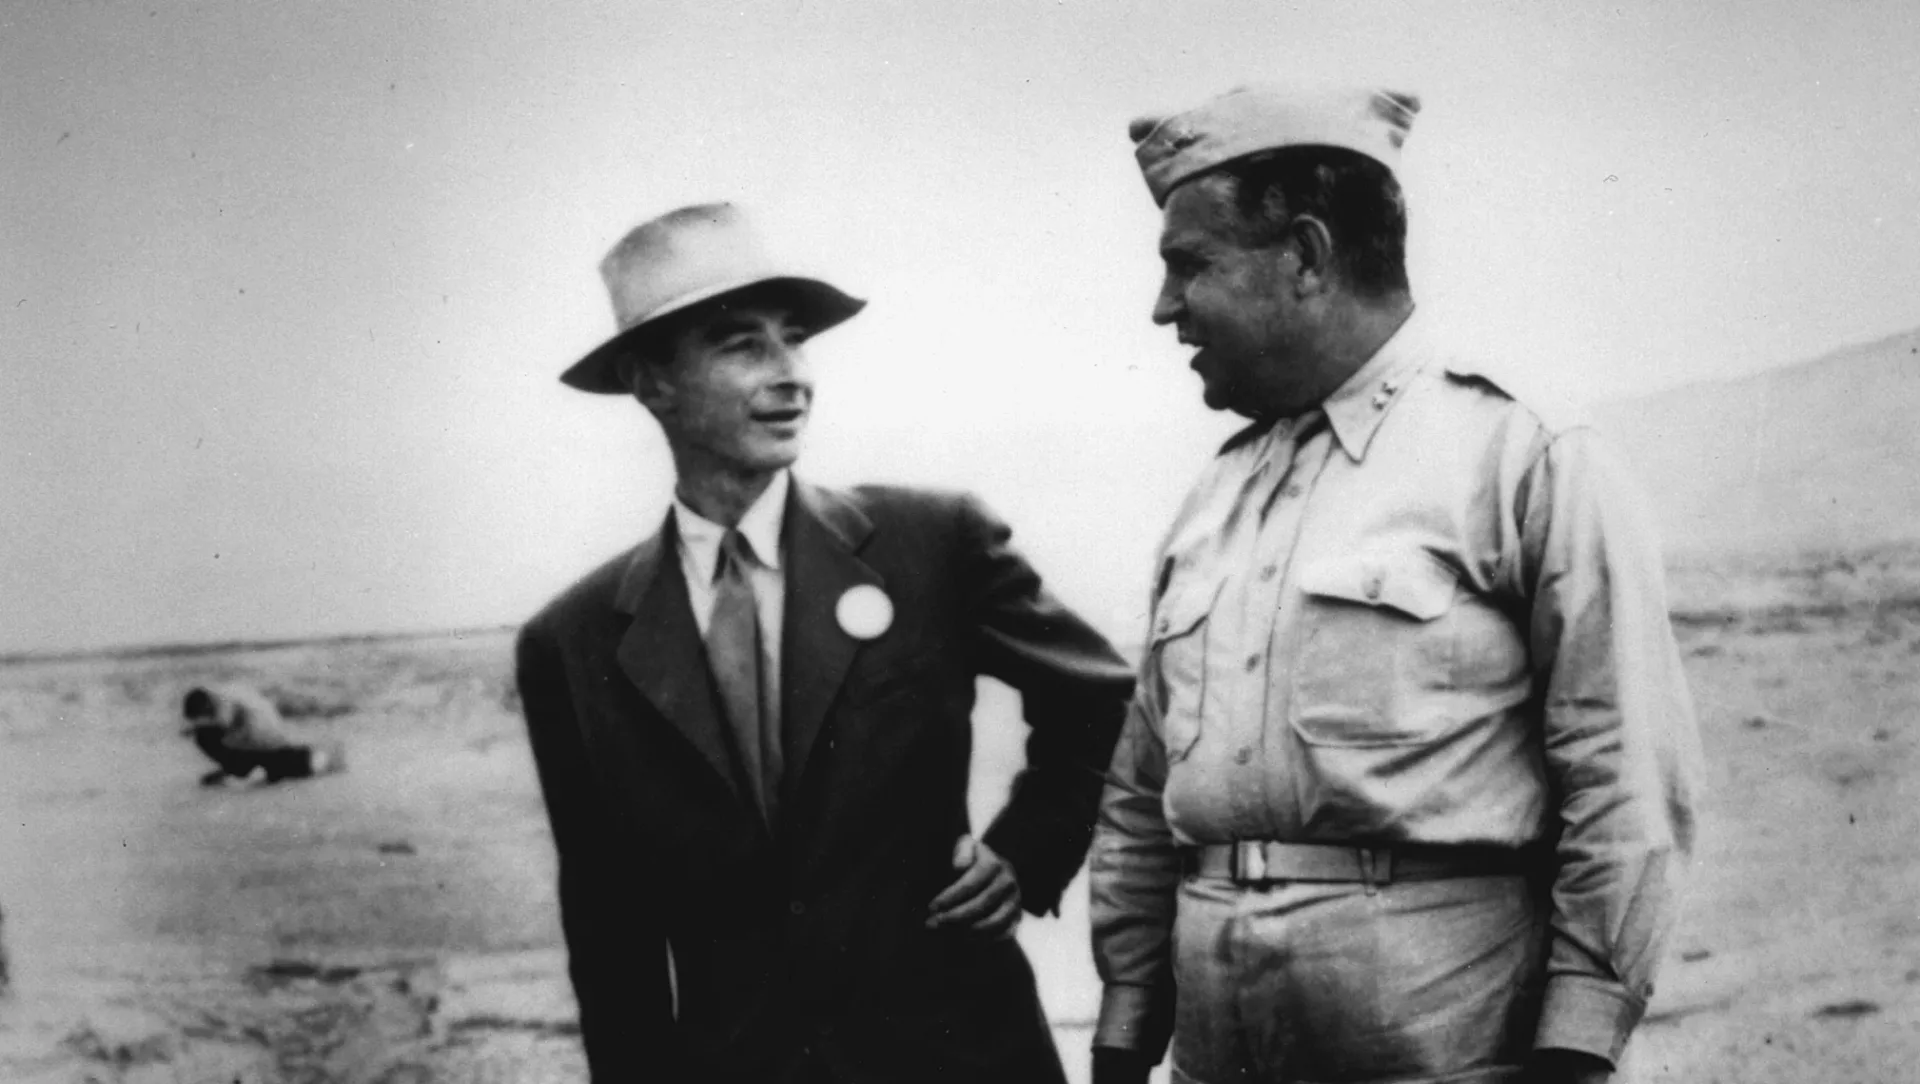 Robbert Oppenheimer and General Leslie Groves at Ground Zero of the nuclear bomb test site.